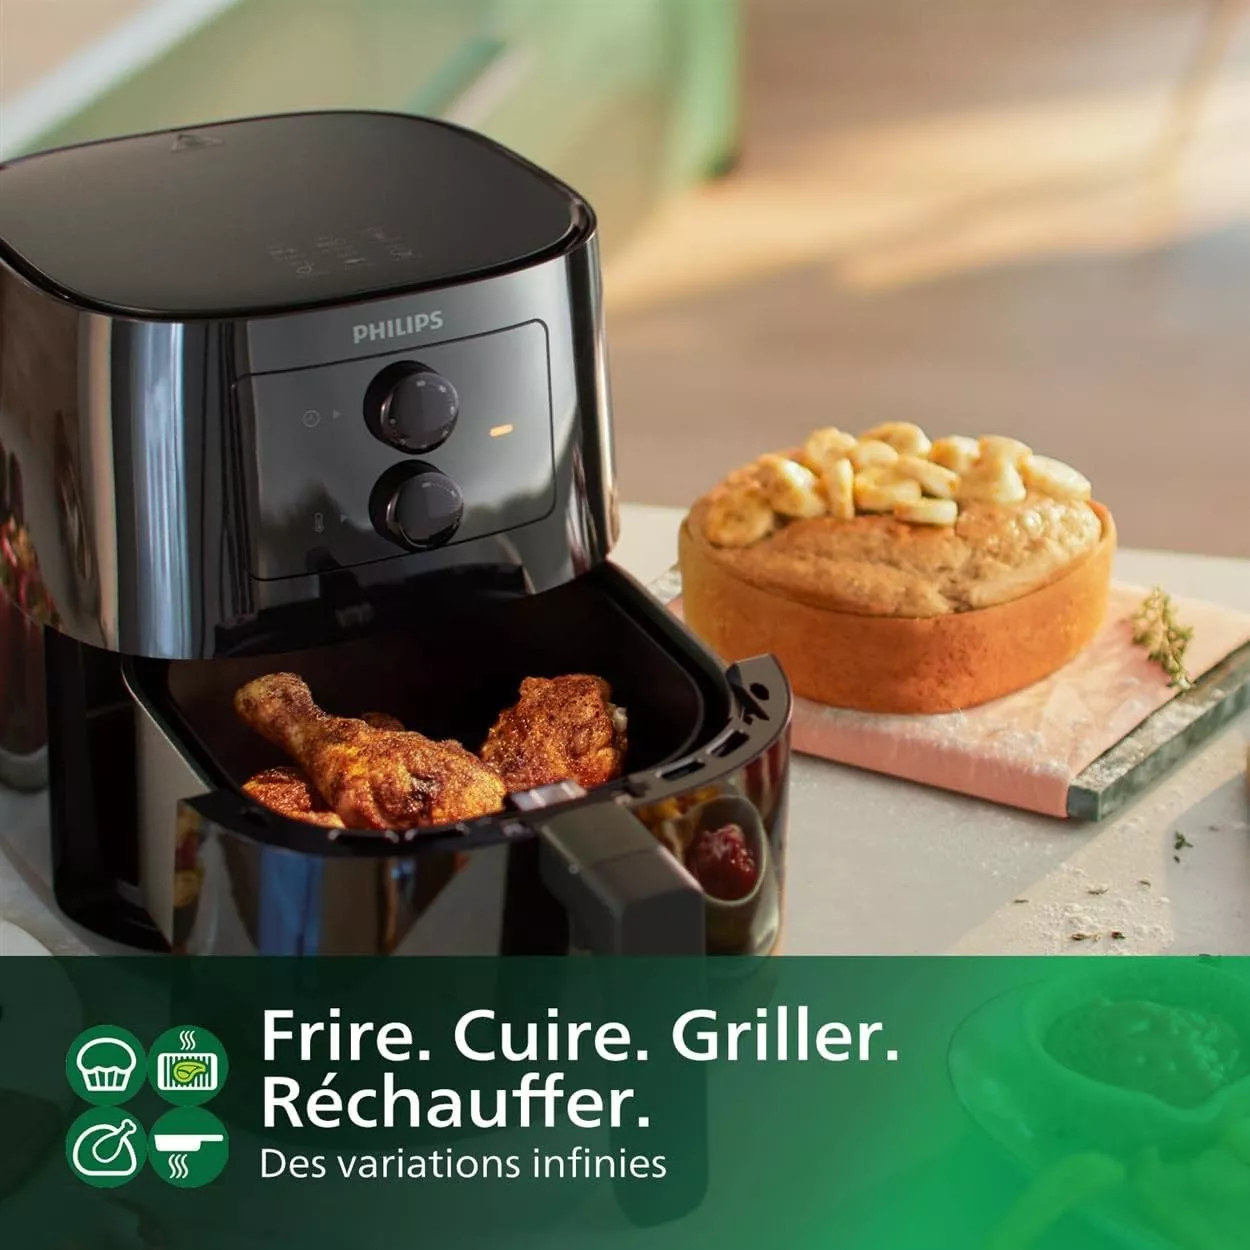 HD9200/90 friteuse Airfryer philips Compact 4,1L, 12-en-1 - 5